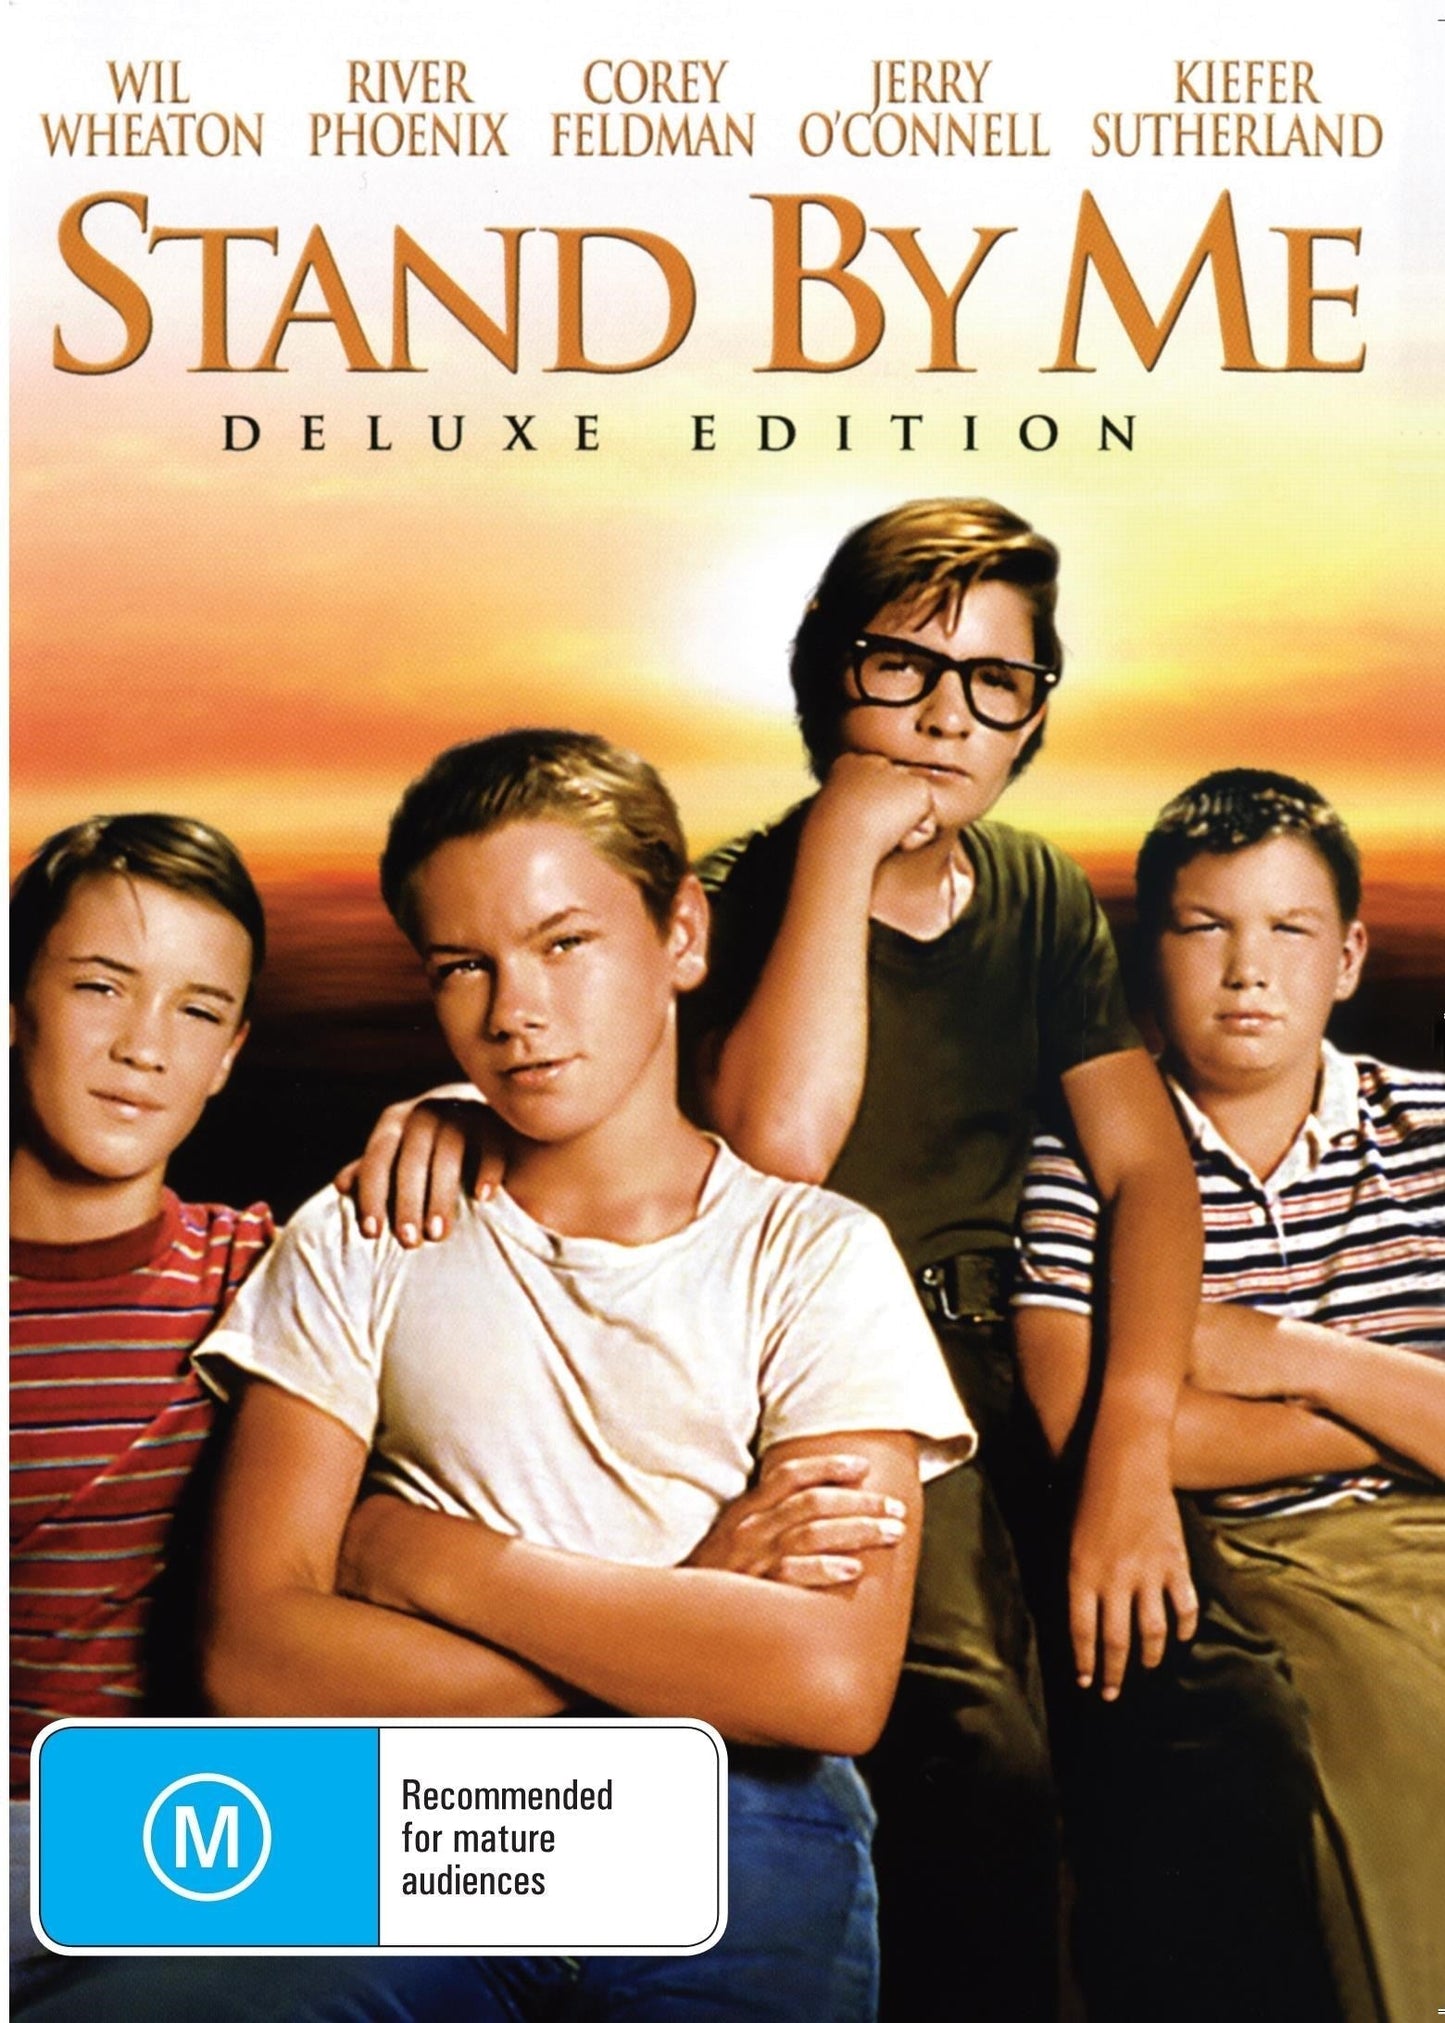 Stand by Me rareandcollectibledvds